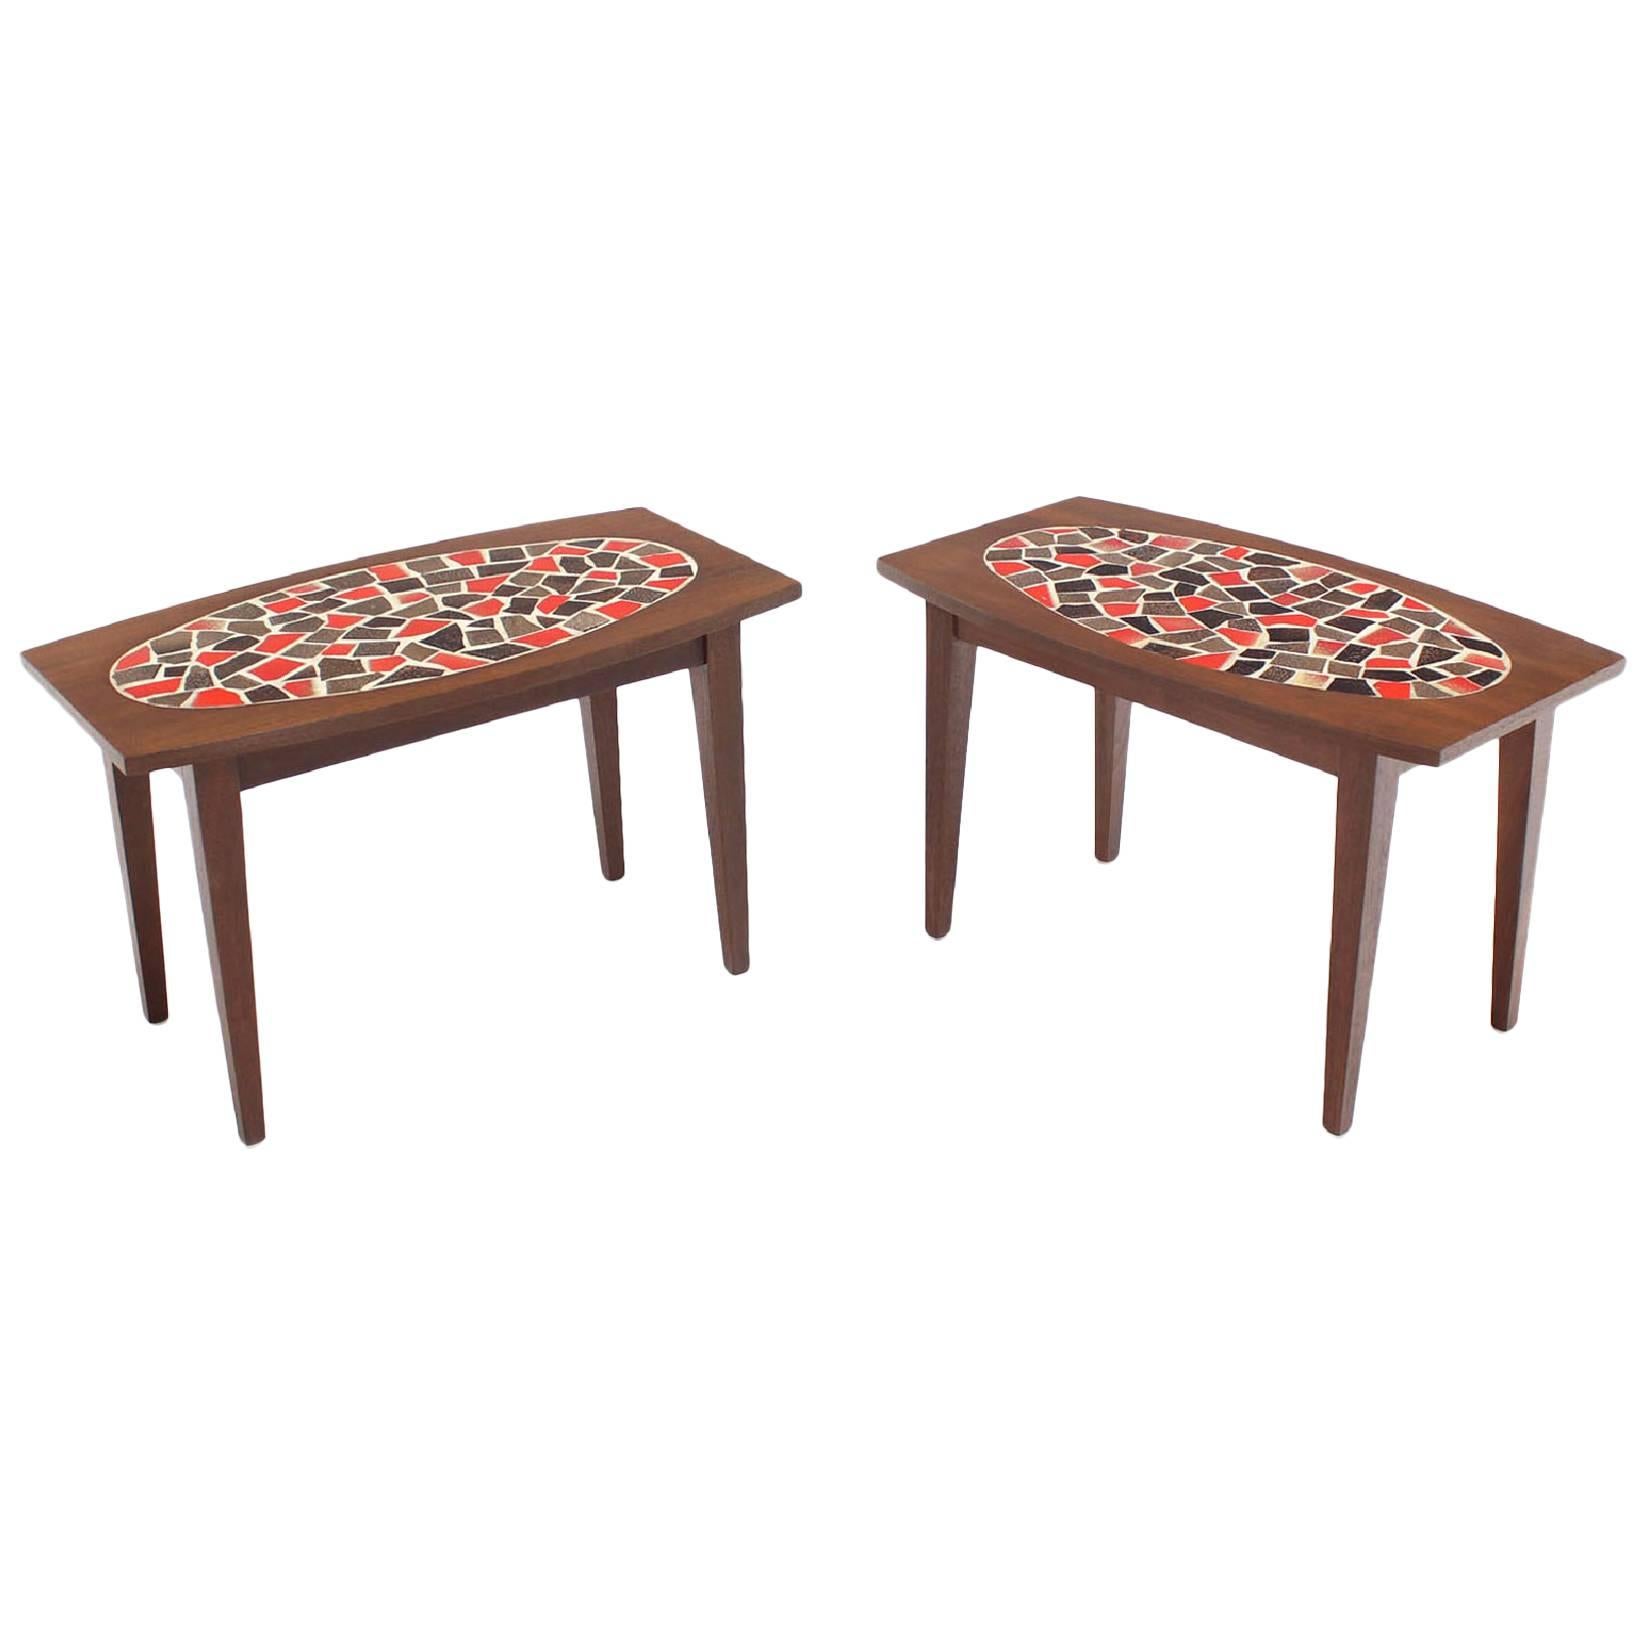 Pair of Walnut and Tile Mosaic Side or End Tables For Sale